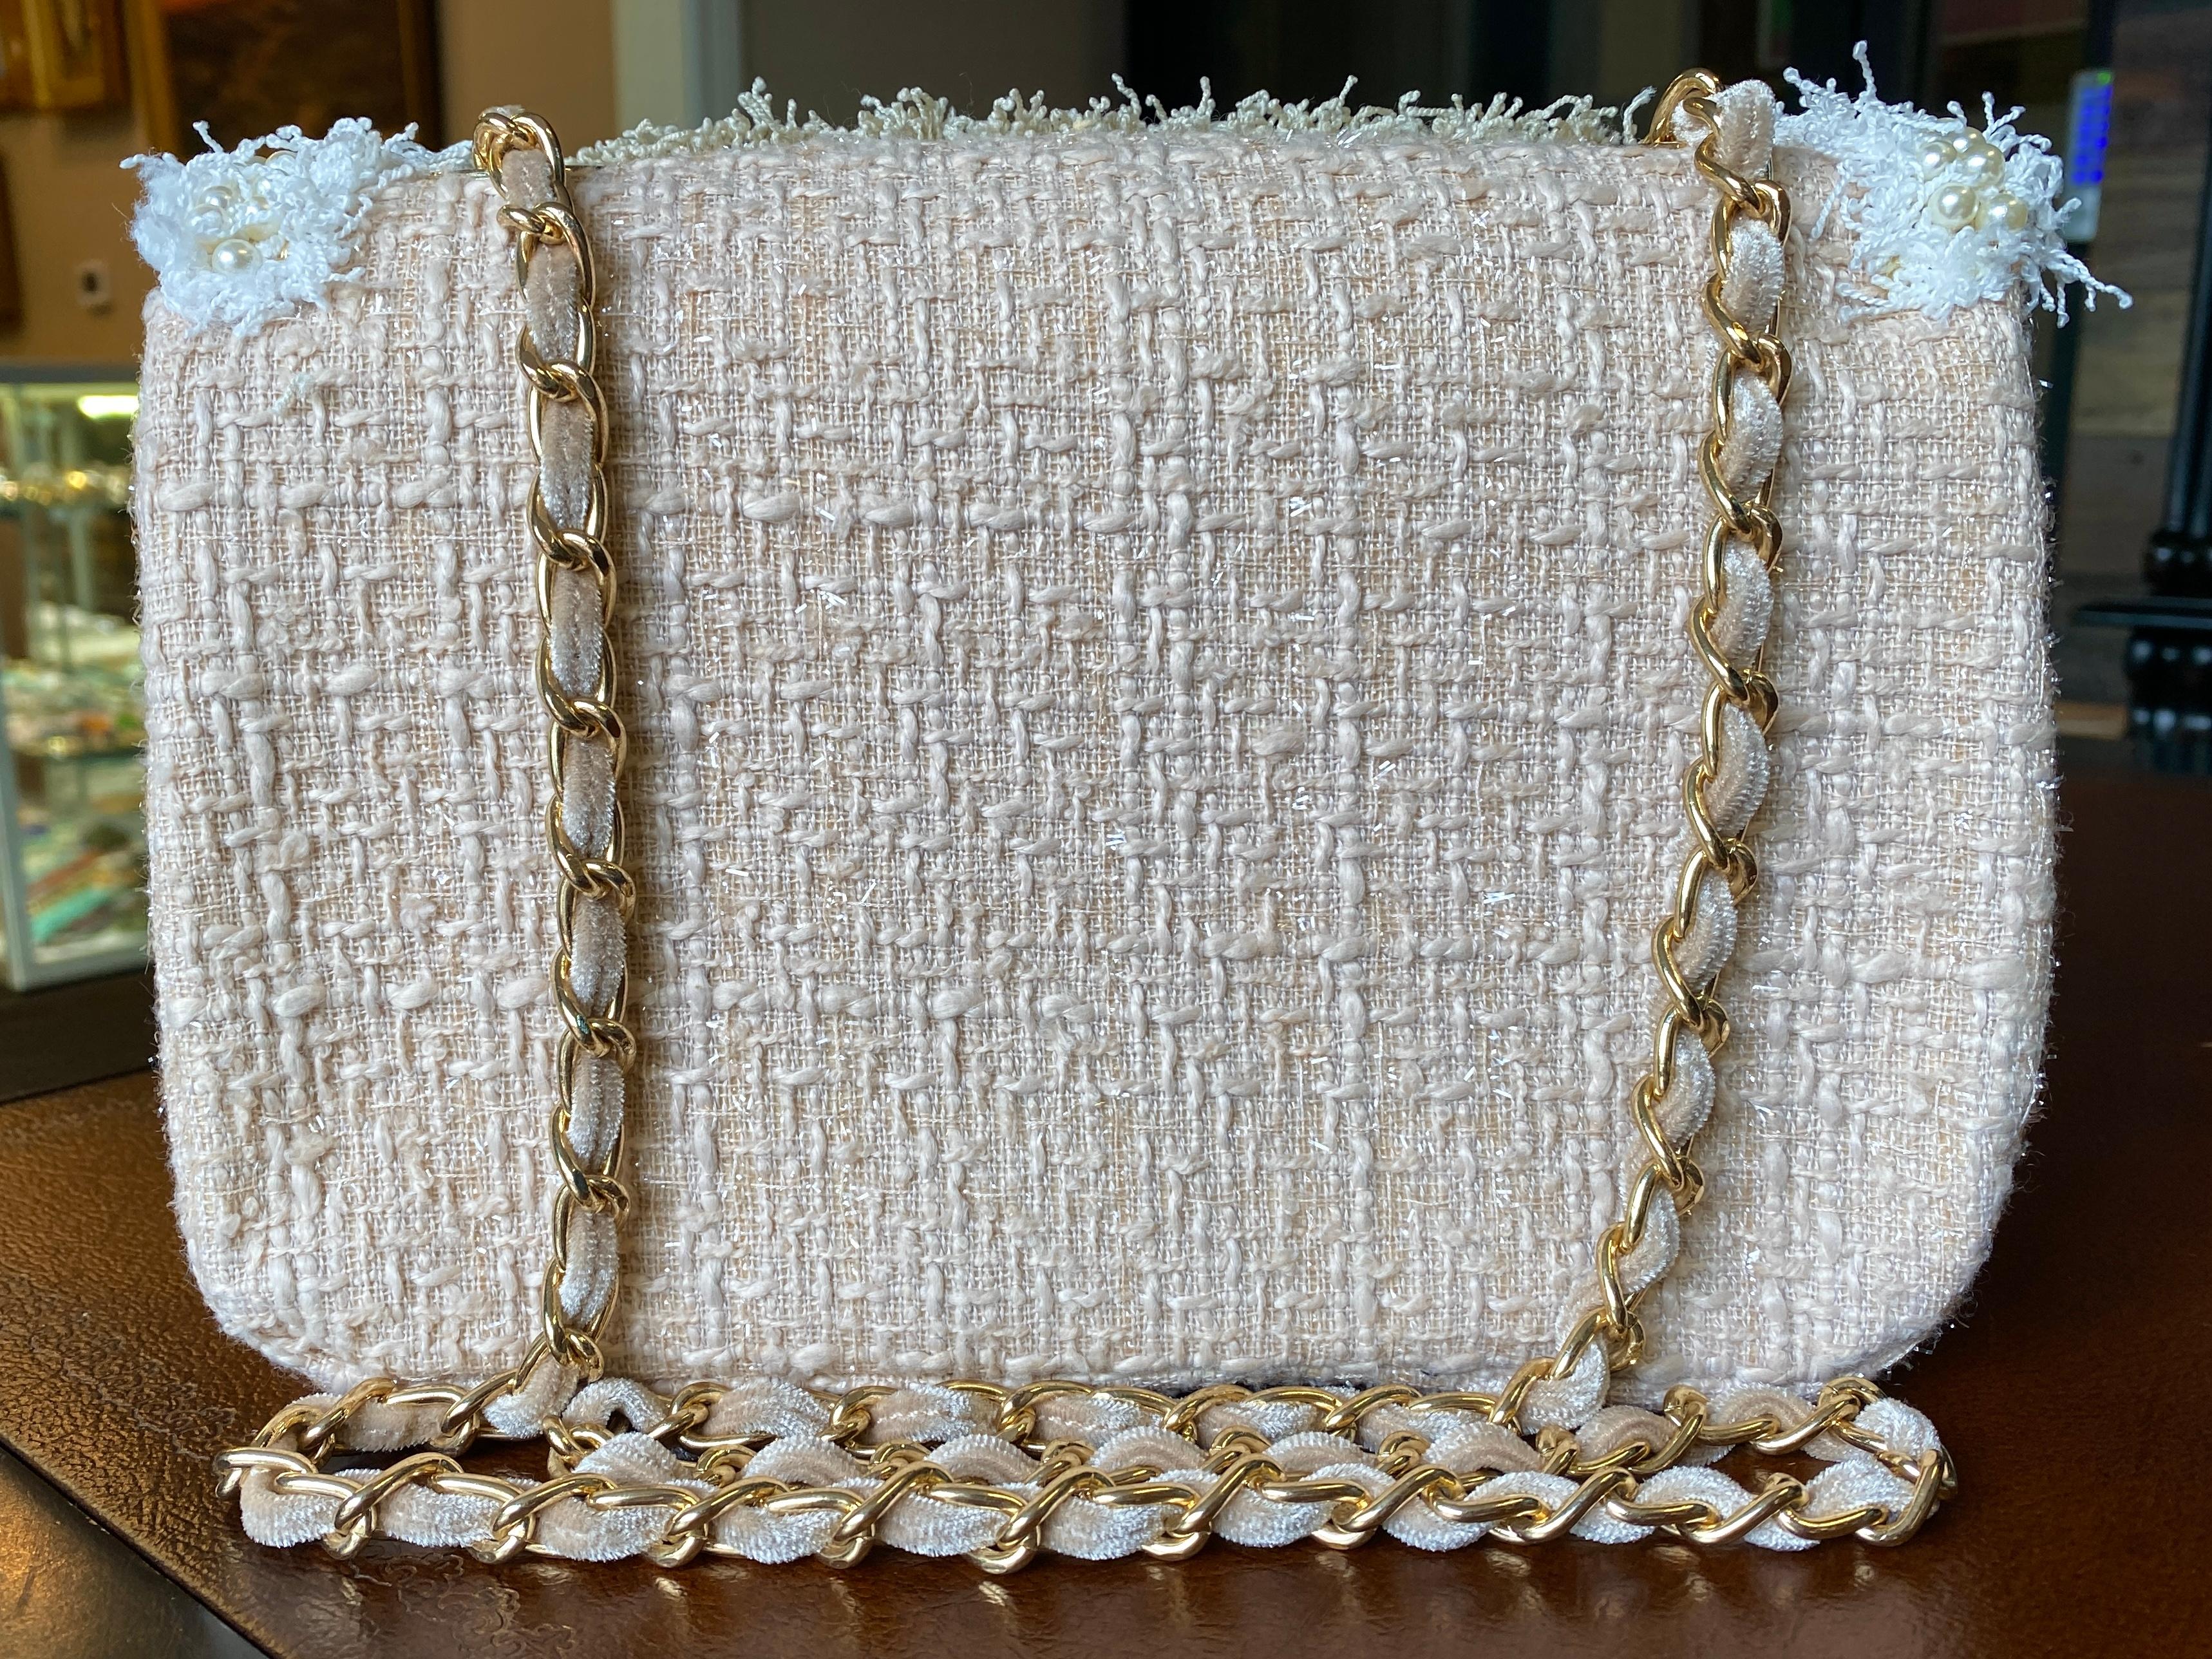 Beige & White Faux Pearl  Woven Crossbody Bag  For Sale 2